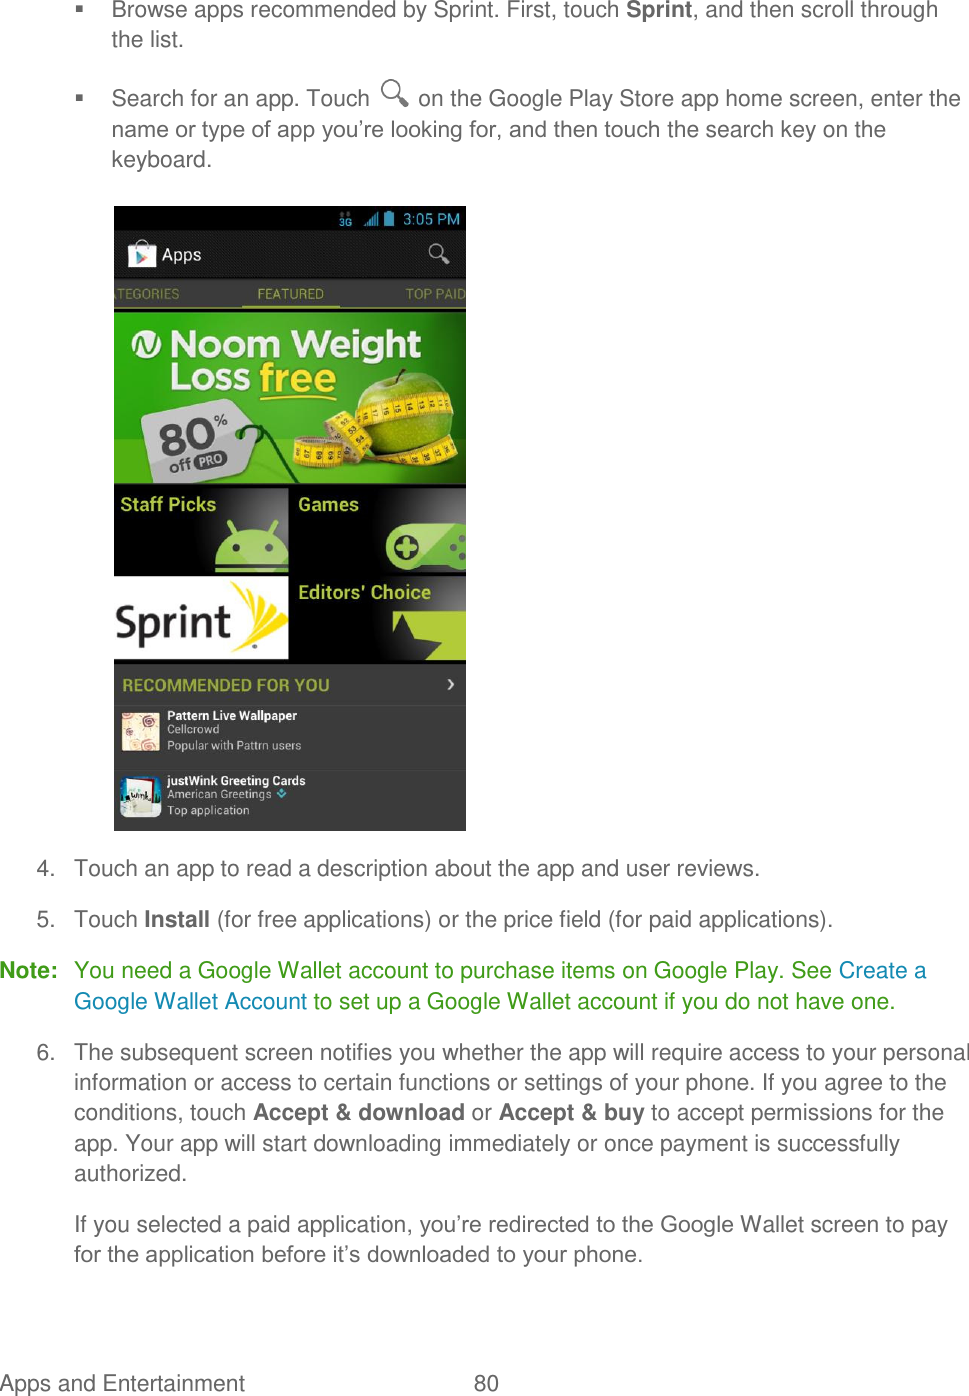 Apps and Entertainment  80     Browse apps recommended by Sprint. First, touch Sprint, and then scroll through the list.   Search for an app. Touch   on the Google Play Store app home screen, enter the name or type of app you‟re looking for, and then touch the search key on the keyboard.   4.  Touch an app to read a description about the app and user reviews. 5.  Touch Install (for free applications) or the price field (for paid applications). Note:  You need a Google Wallet account to purchase items on Google Play. See Create a Google Wallet Account to set up a Google Wallet account if you do not have one. 6.  The subsequent screen notifies you whether the app will require access to your personal information or access to certain functions or settings of your phone. If you agree to the conditions, touch Accept &amp; download or Accept &amp; buy to accept permissions for the app. Your app will start downloading immediately or once payment is successfully authorized. If you selected a paid application, you‟re redirected to the Google Wallet screen to pay for the application before it‟s downloaded to your phone. 